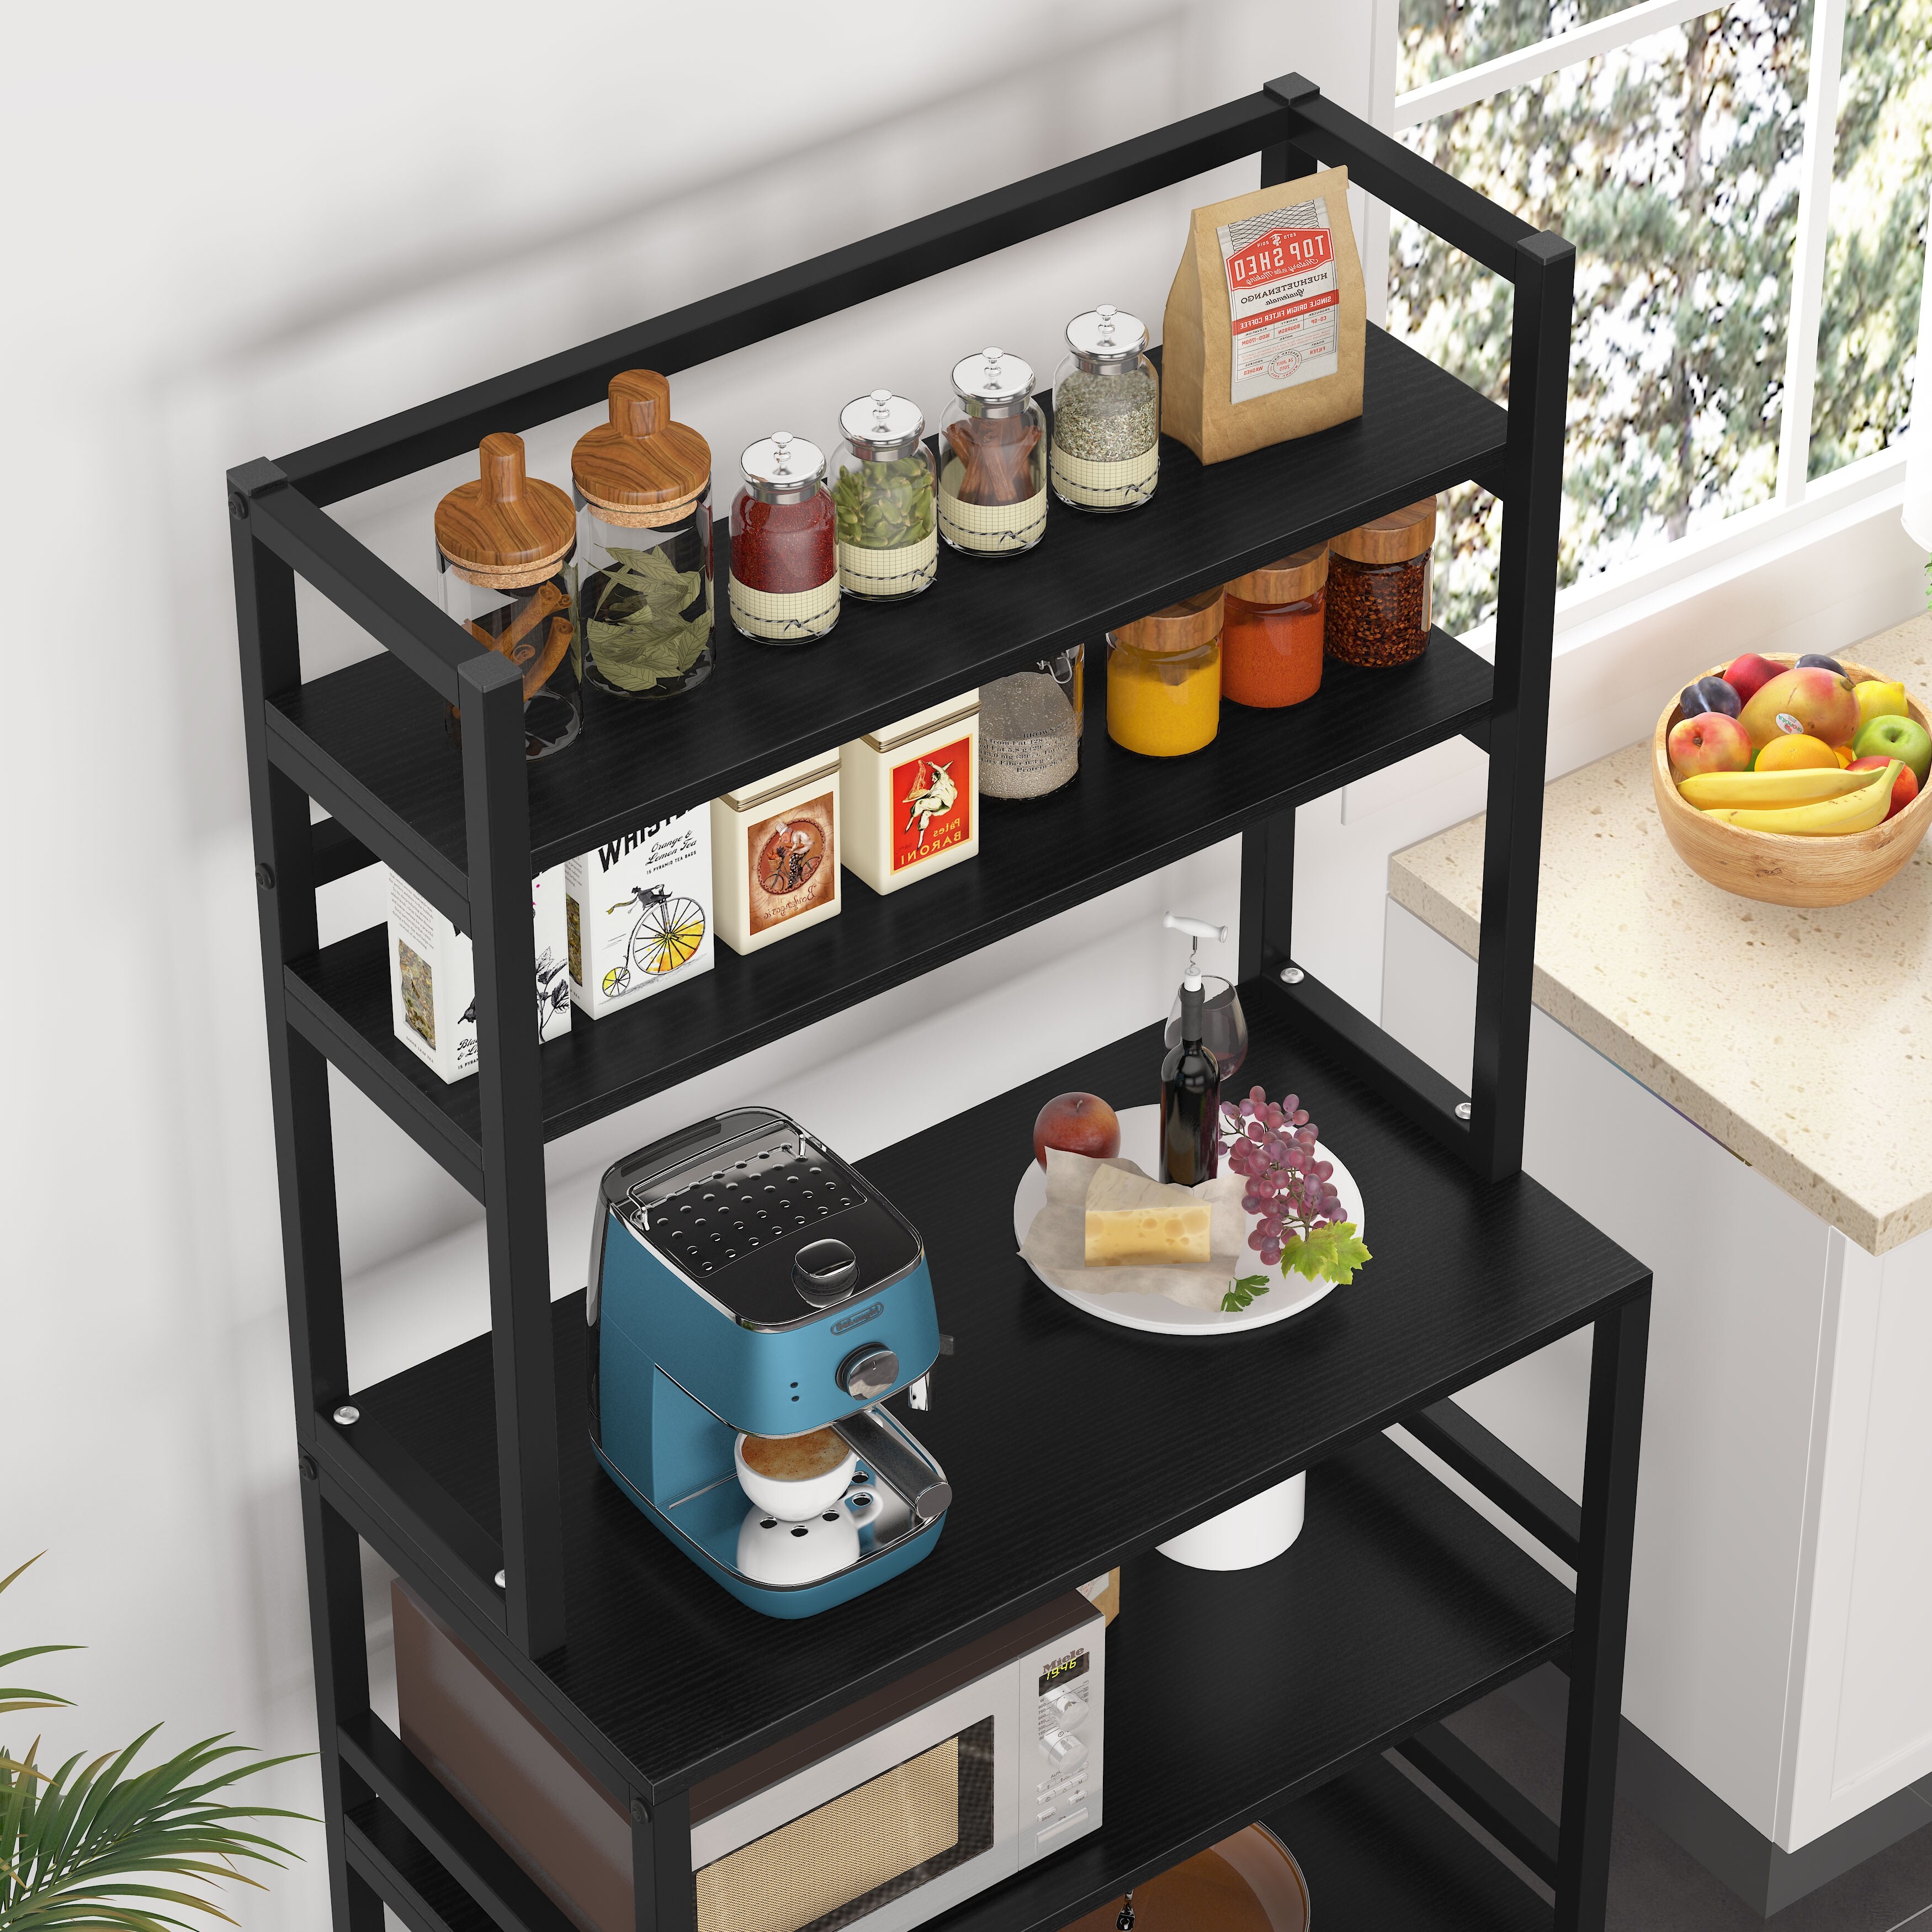 https://ak1.ostkcdn.com/images/products/is/images/direct/3702881ba1416632a0f8fed018b3834dd23534ee/5-Tier-Kitchen-Bakers-Rack-with-Hutch-Organizer-Rack.jpg